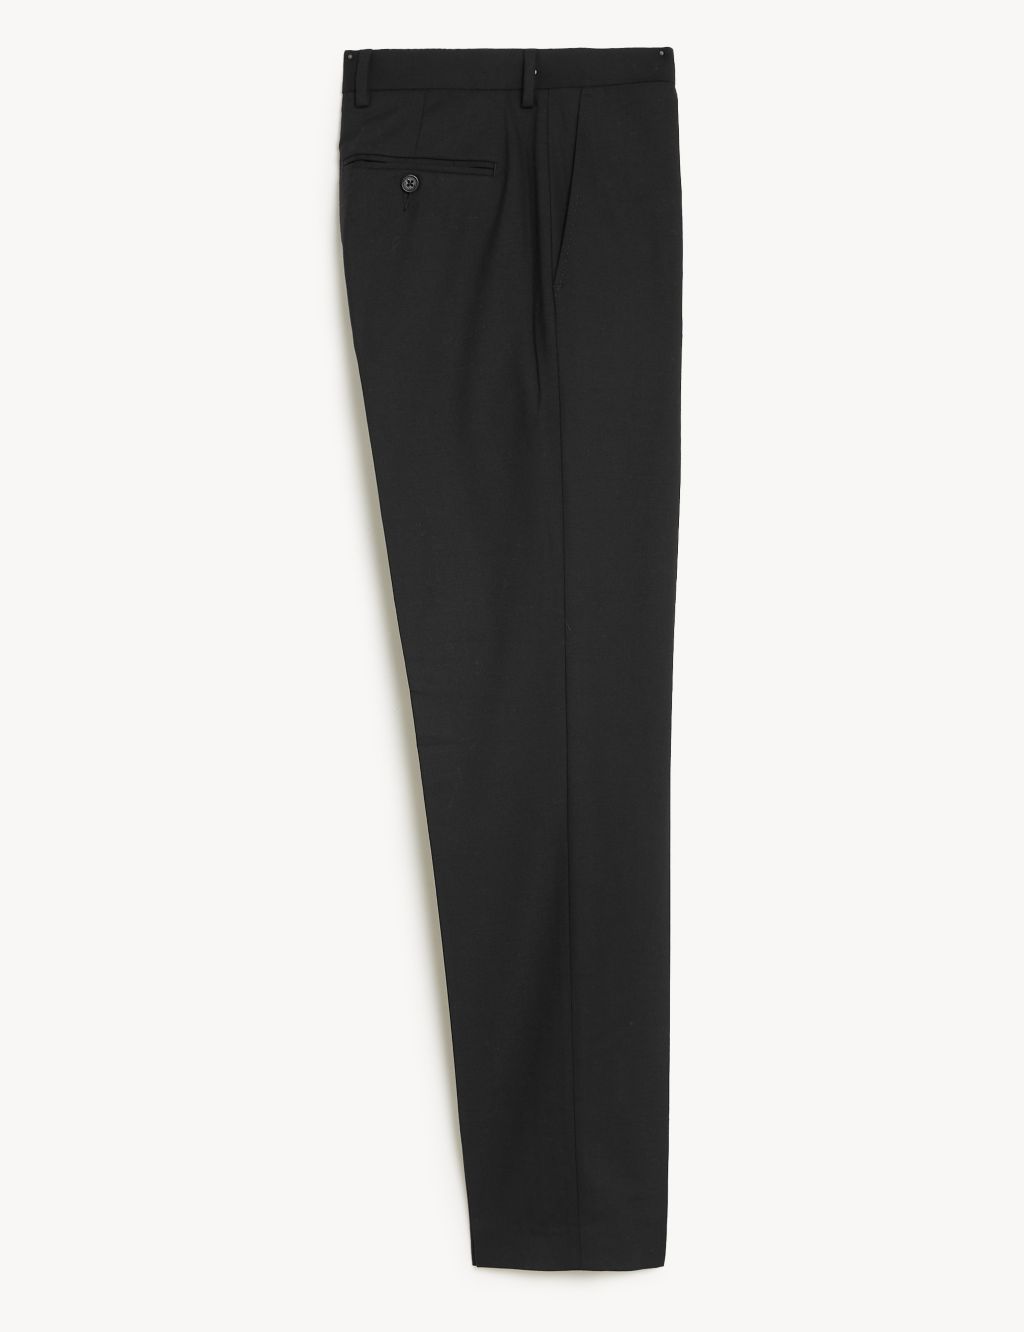 Regular Fit Wool Blend Flat Front Trousers | M&S Collection | M&S